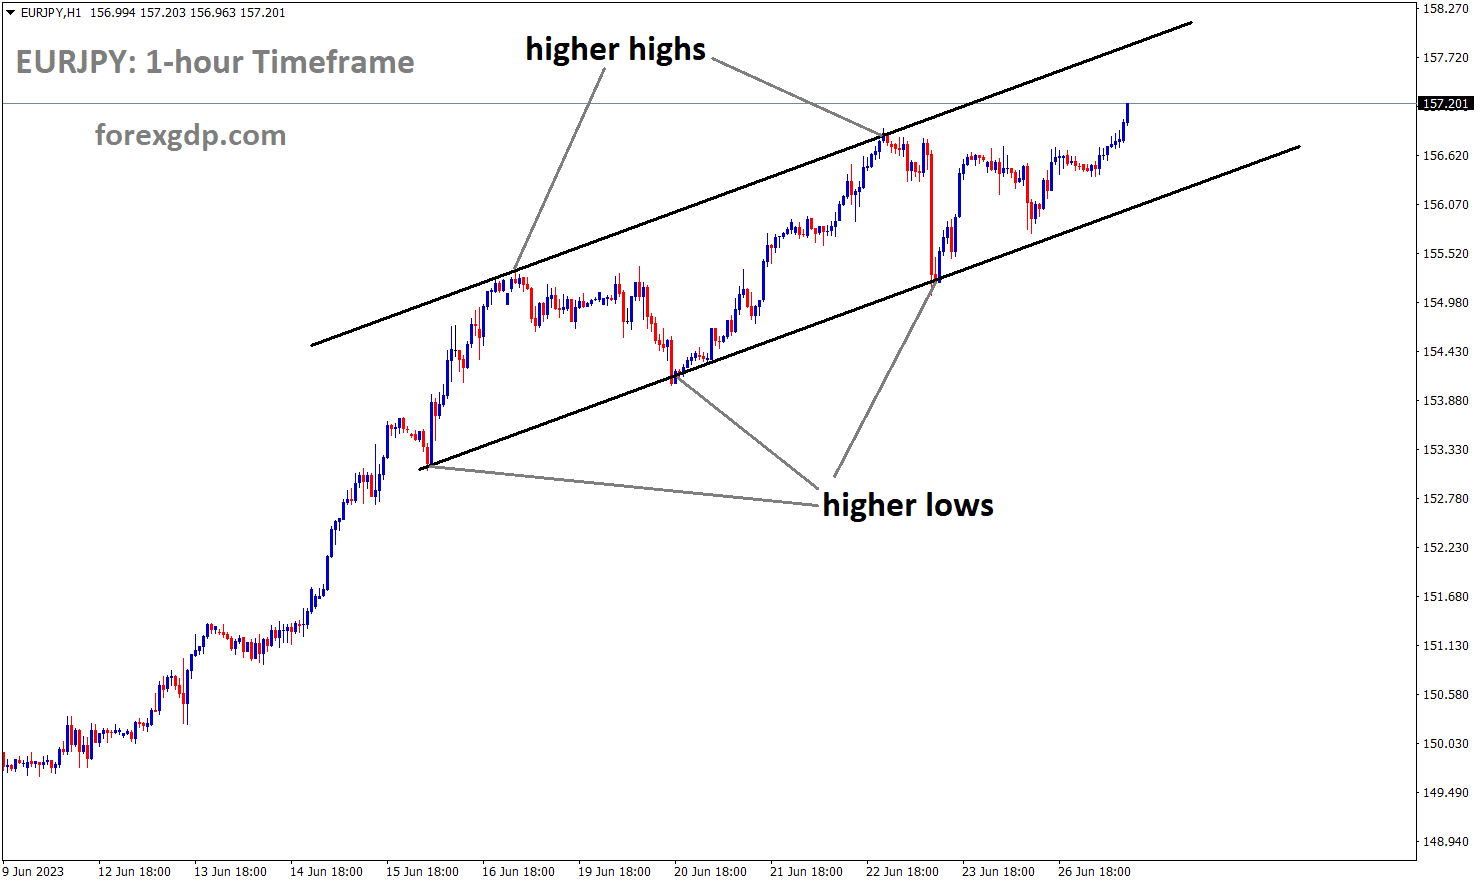 EURJPY is moving in an Ascending channel and the market has rebounded from the higher low area of the channel